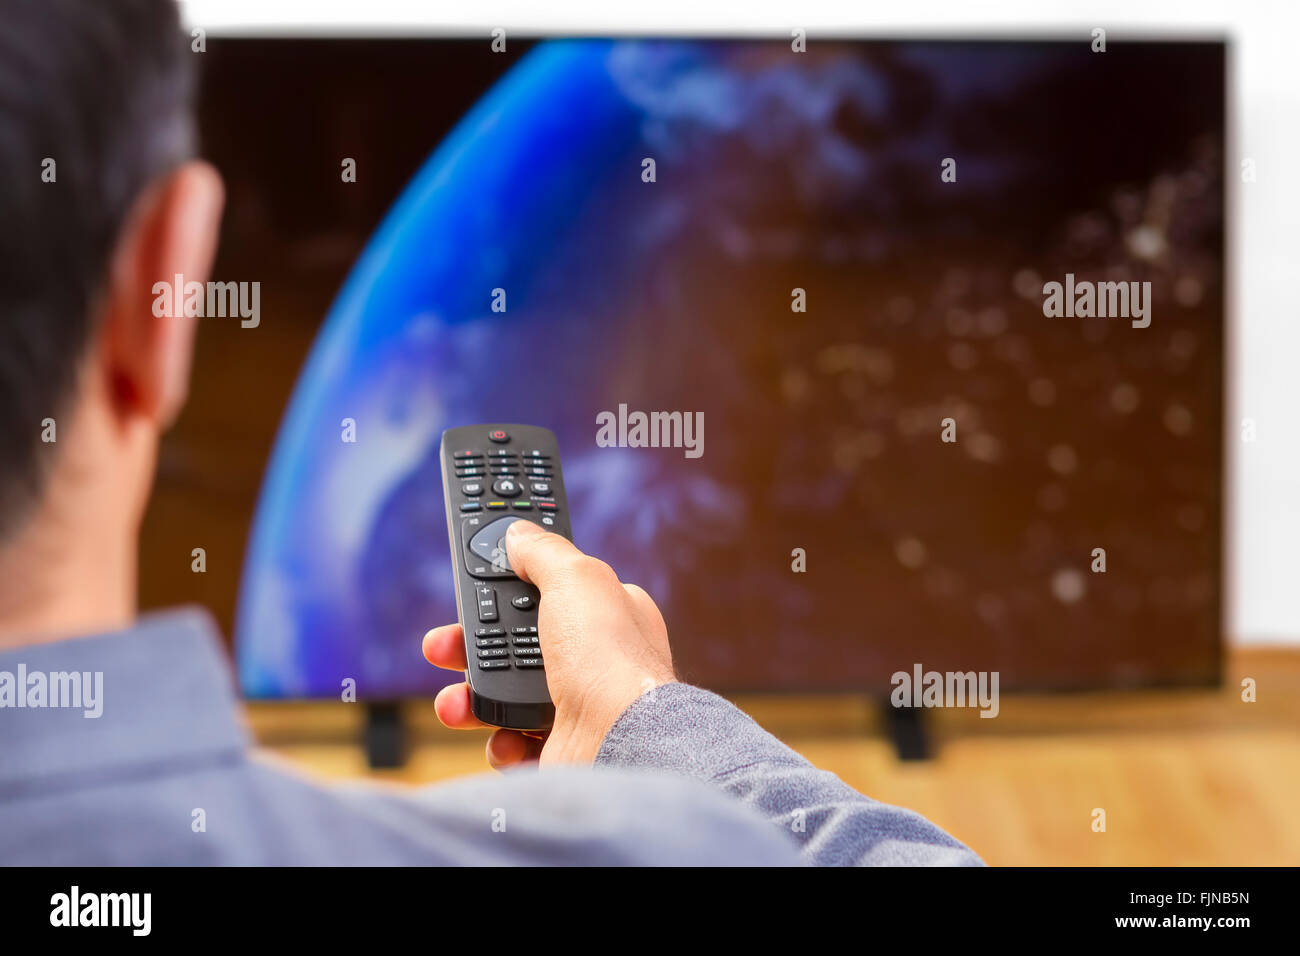 Man sitting on a sofa watching tv holding remote control. Focus on the remote control. Stock Photo